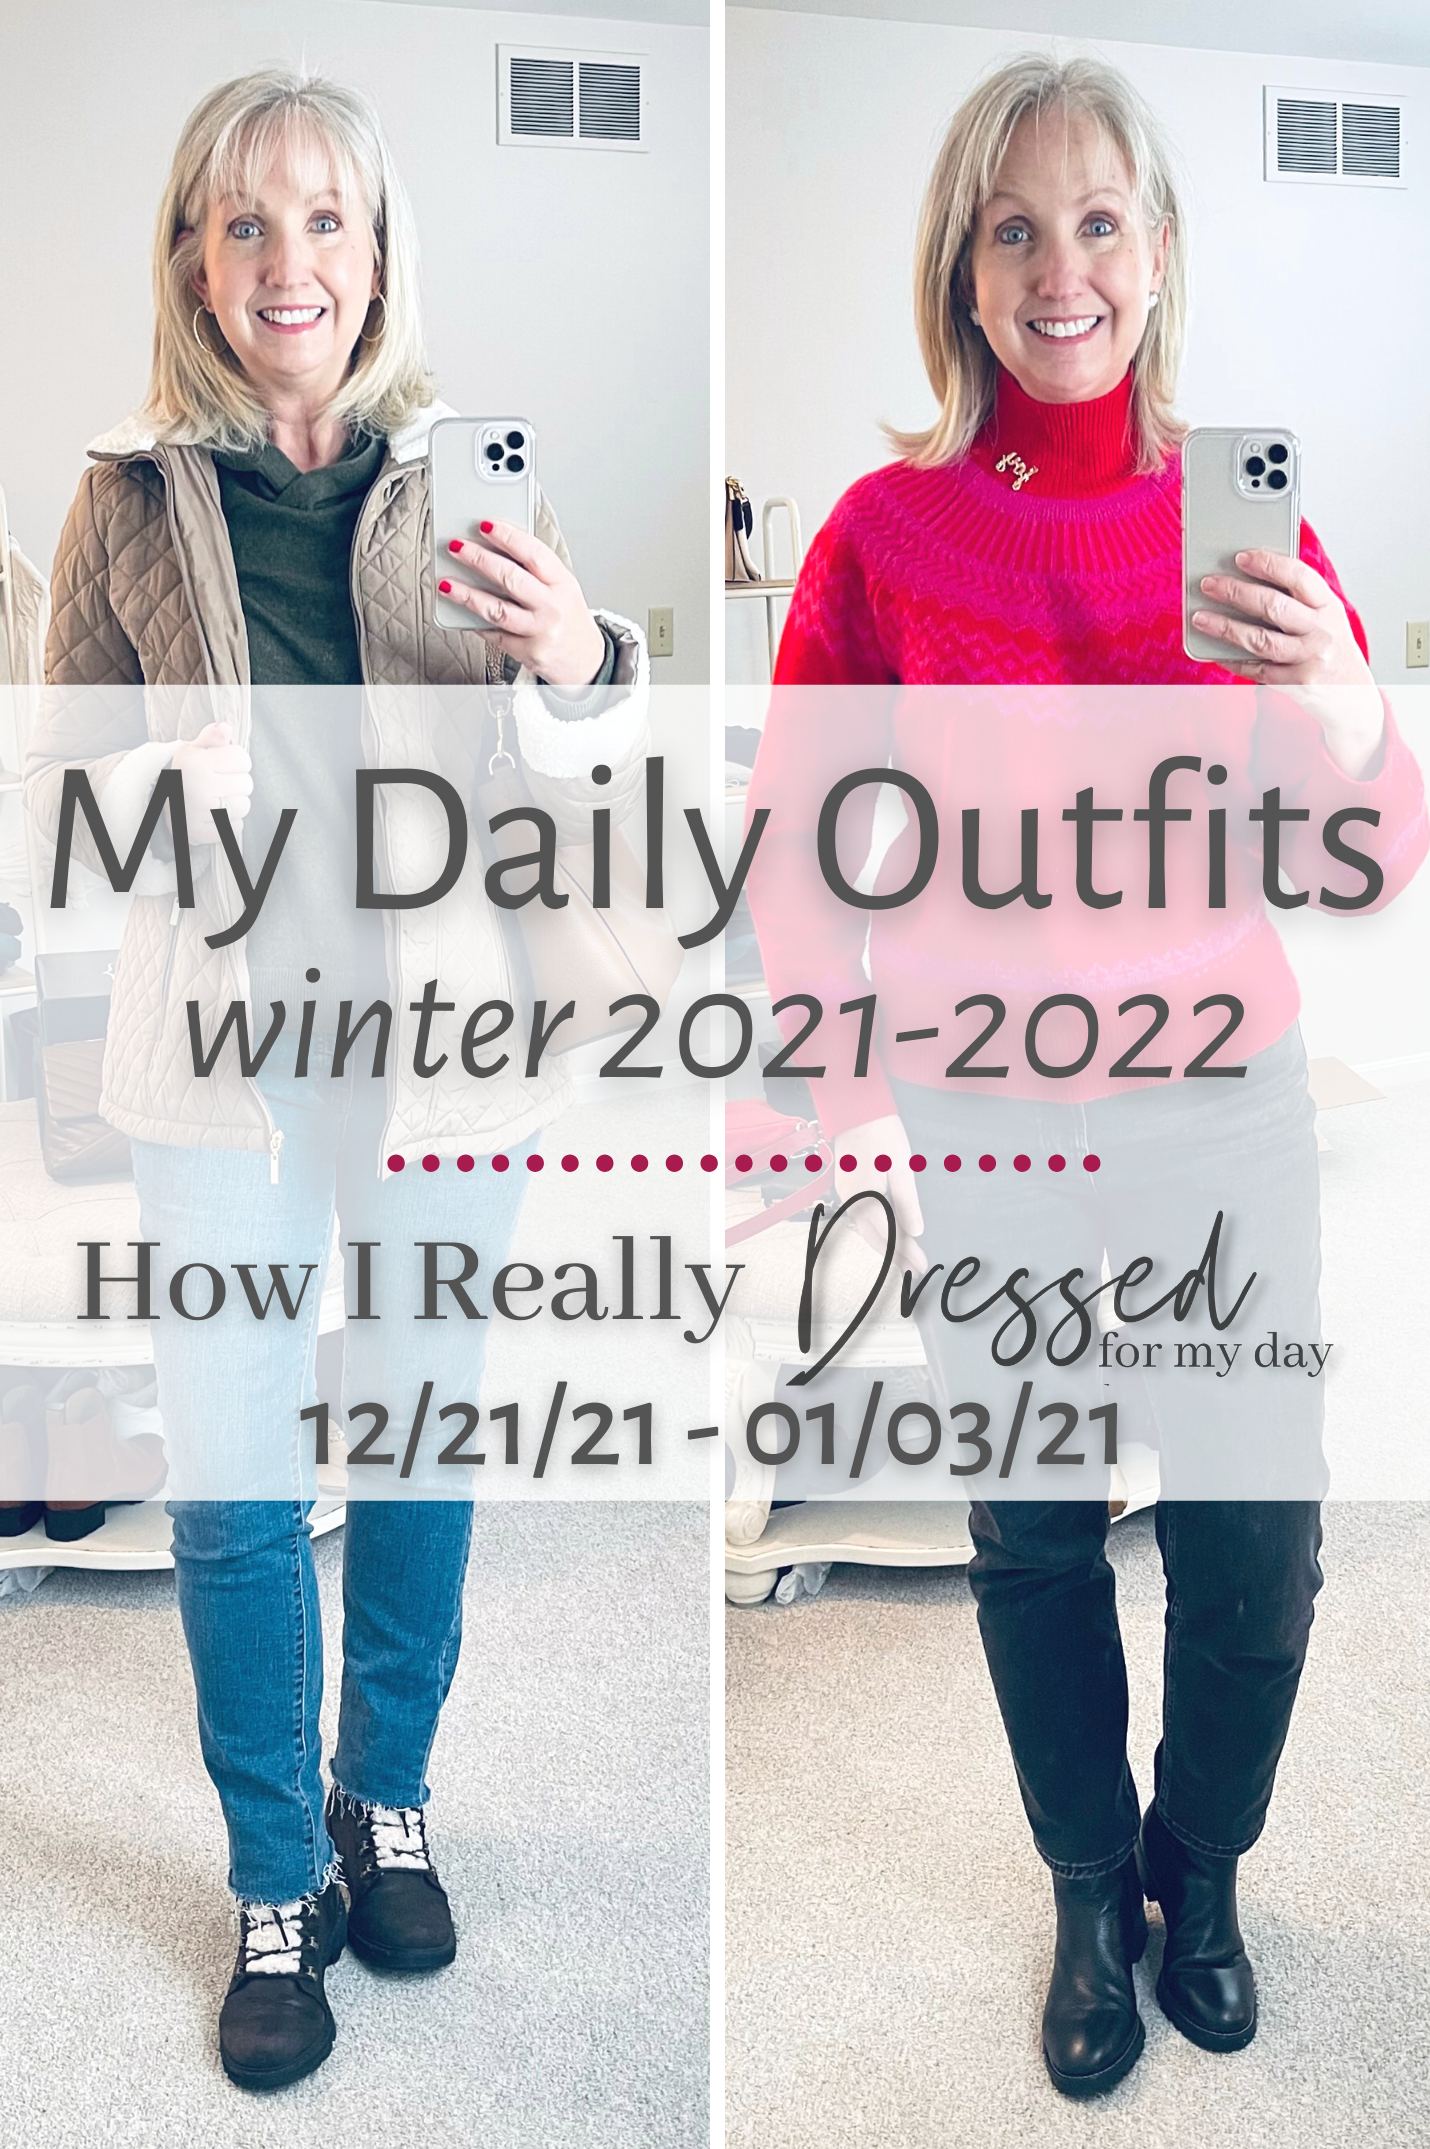 My Daily Outfits Winter 2021-2022